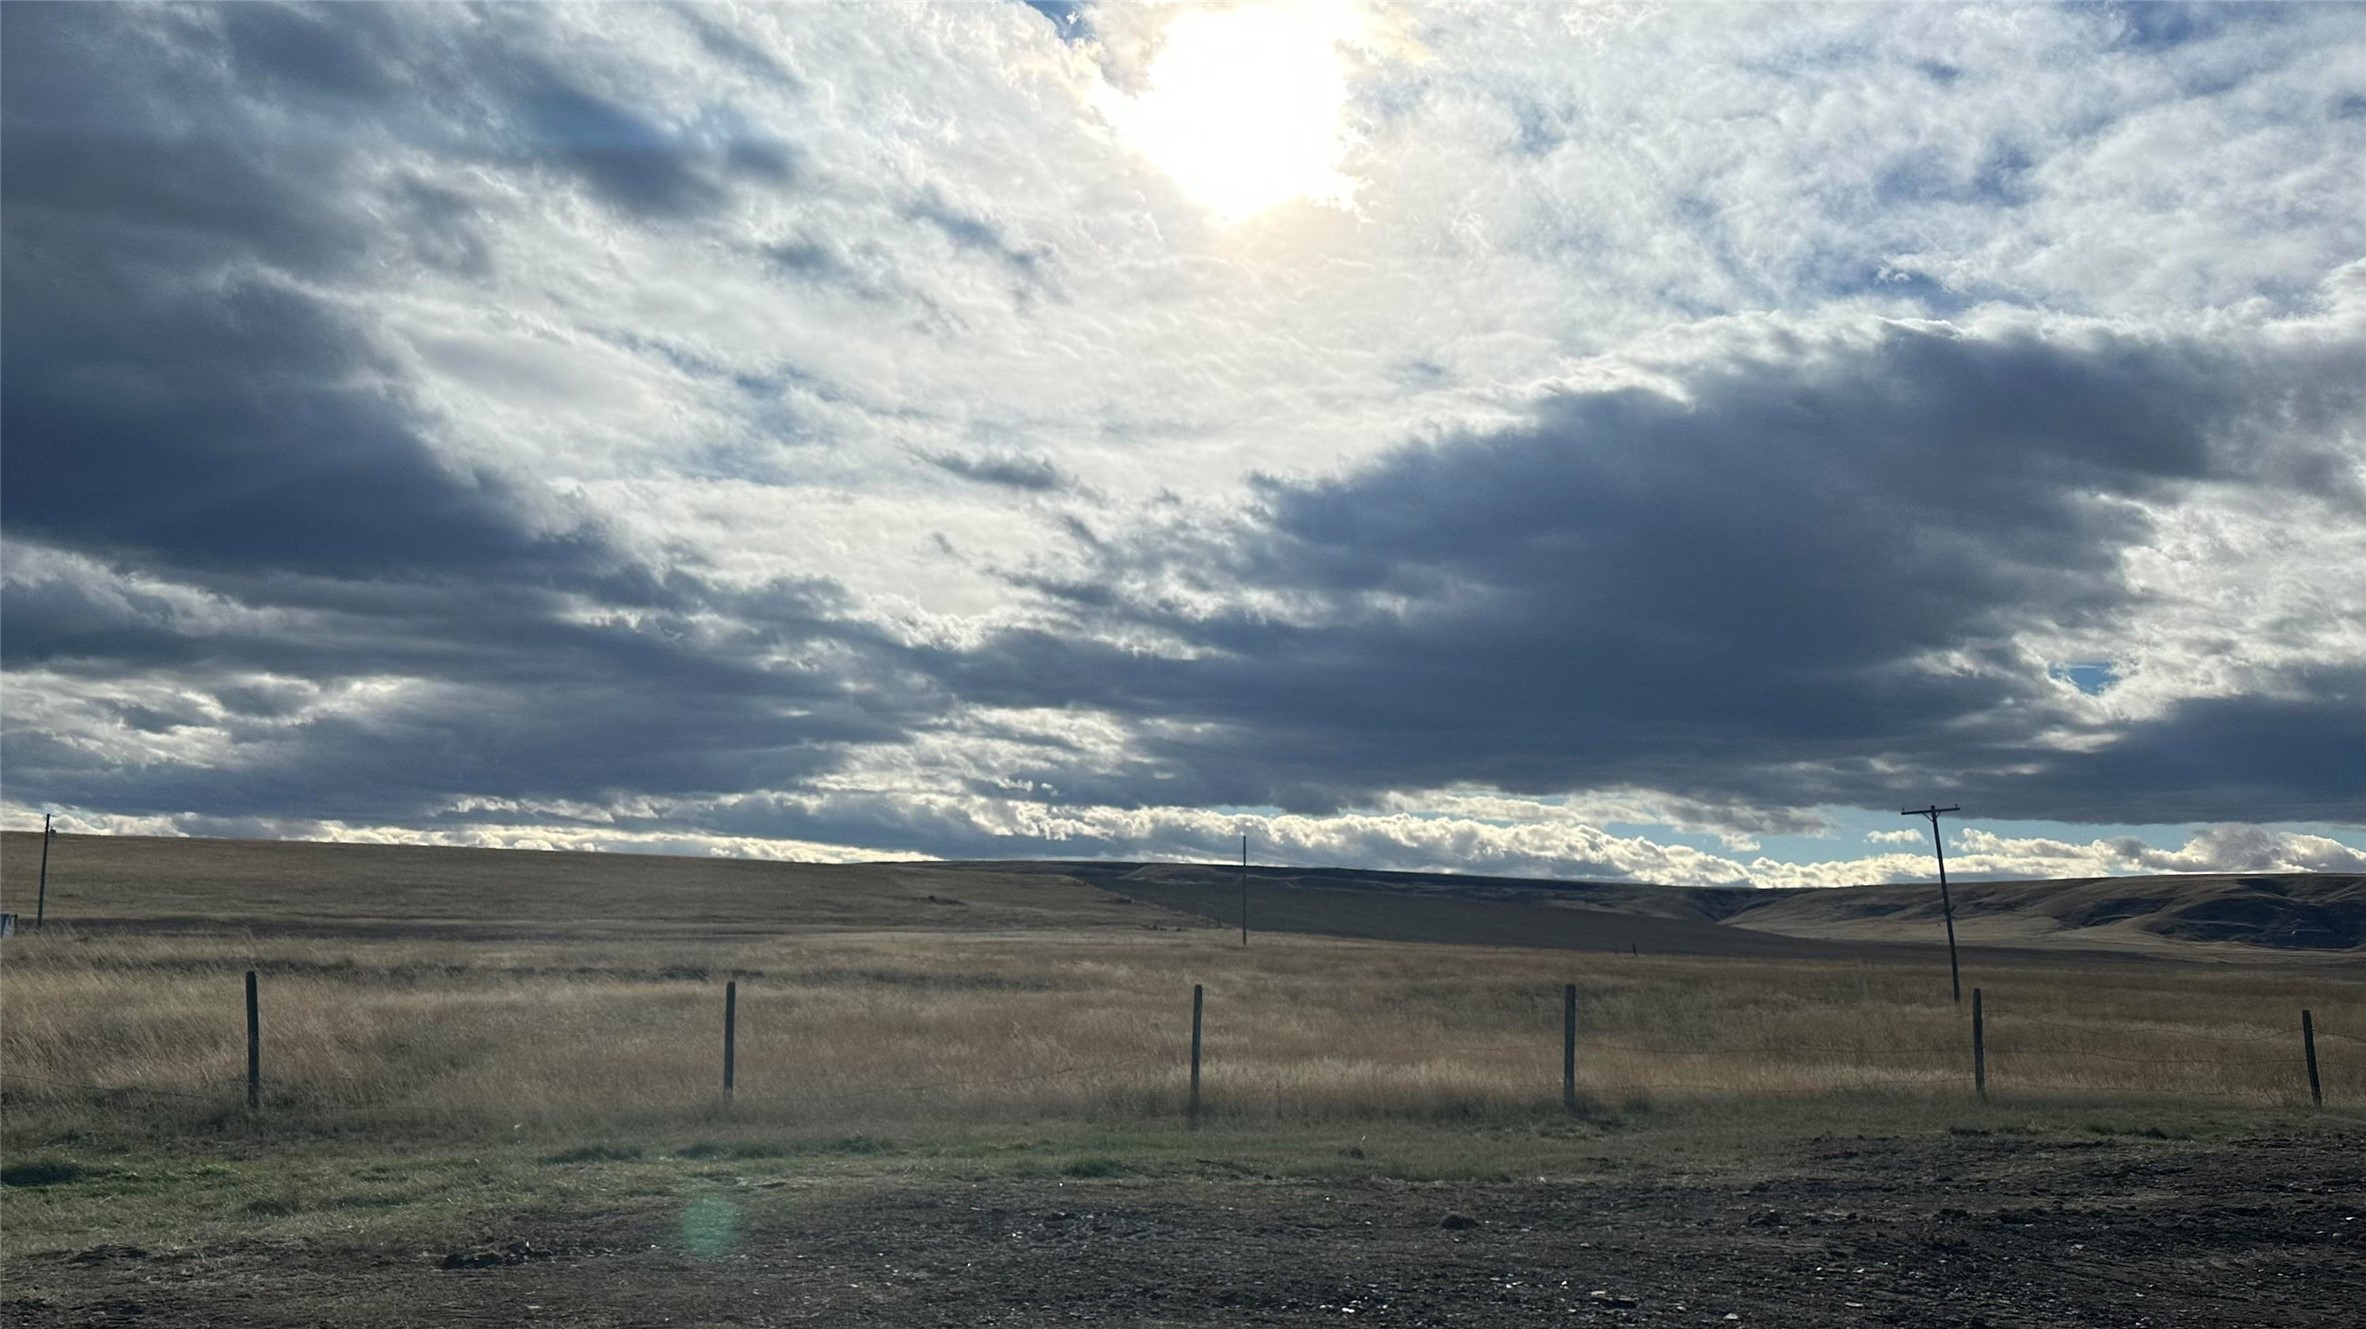 Own a piece of Montana! This 5.05 acre parcel is your opportunity to build your dream home! Views all around and many flat areas to choose your build site. Country living just minutes from Great Falls. Lot has a recorded easement to the property.